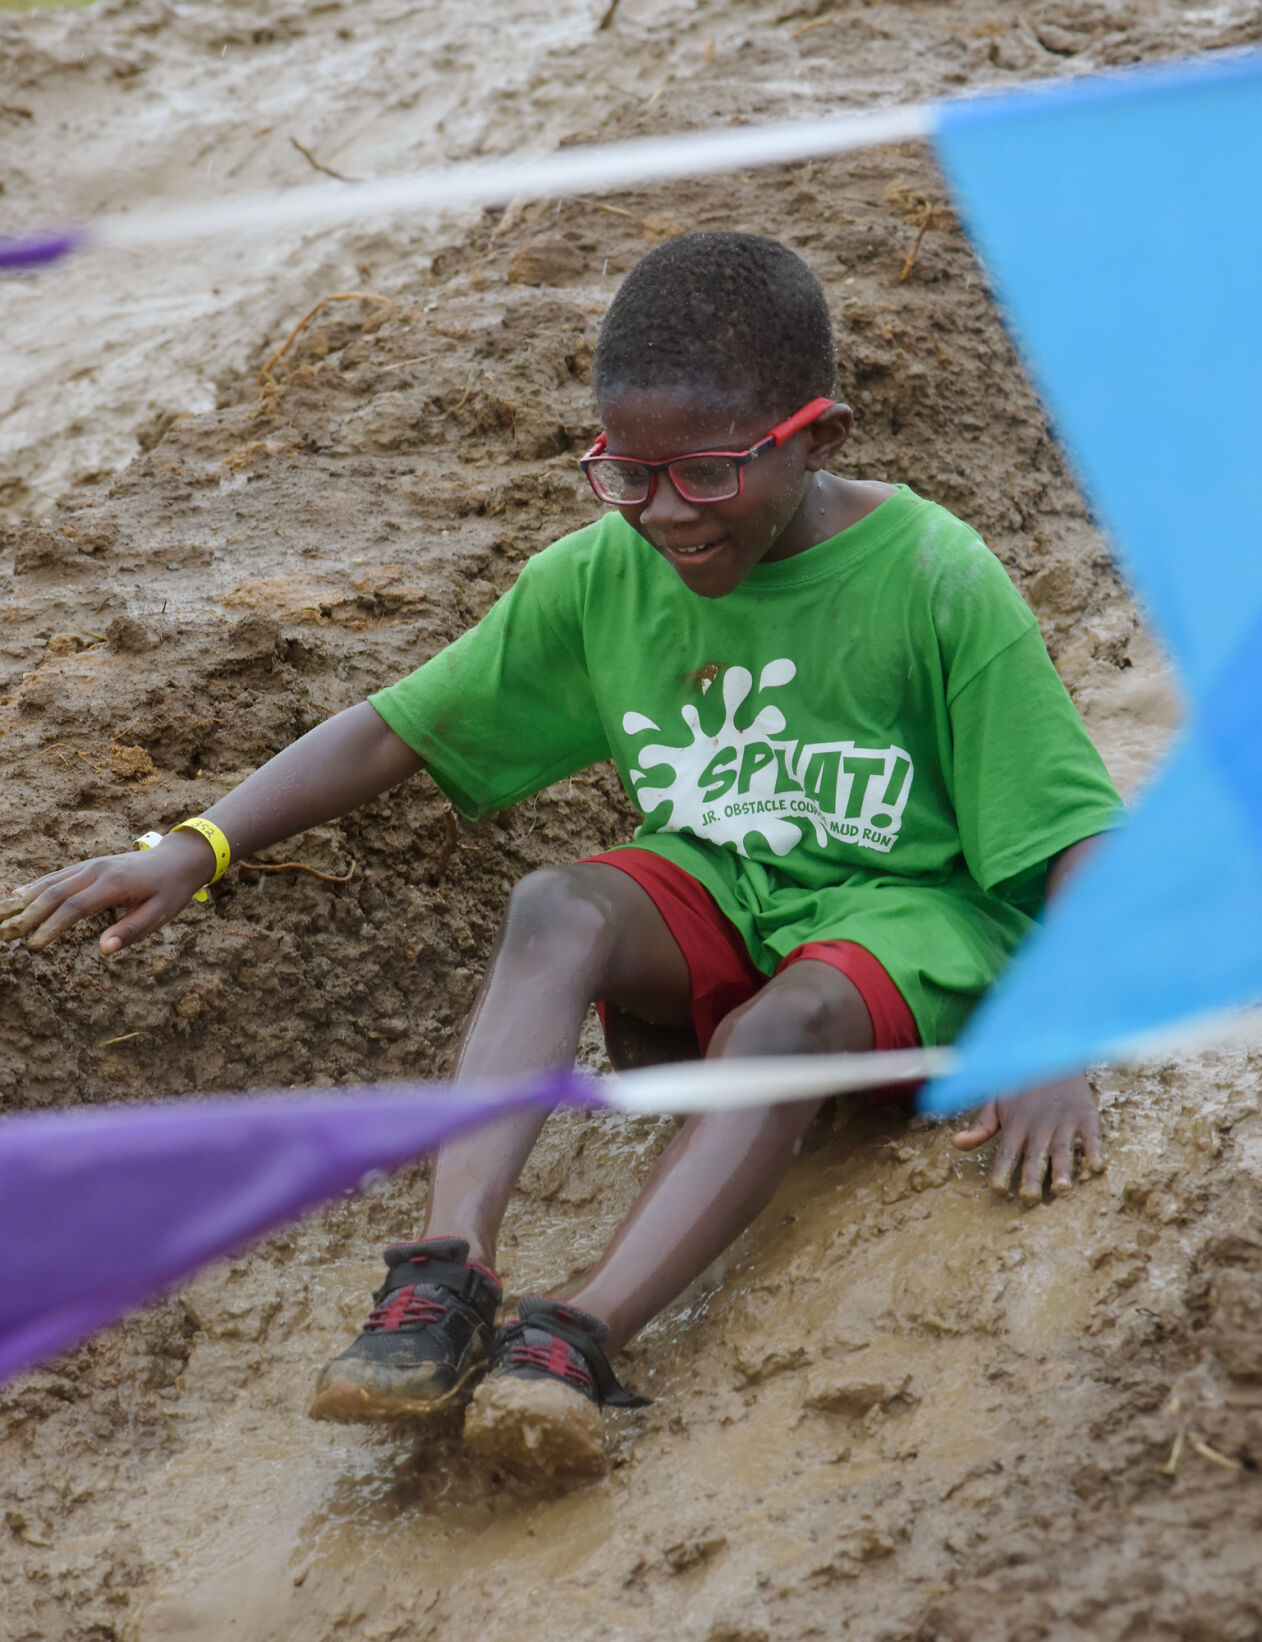 The 2021 Splat Jr. Obstacle Course Mud Run, in photos